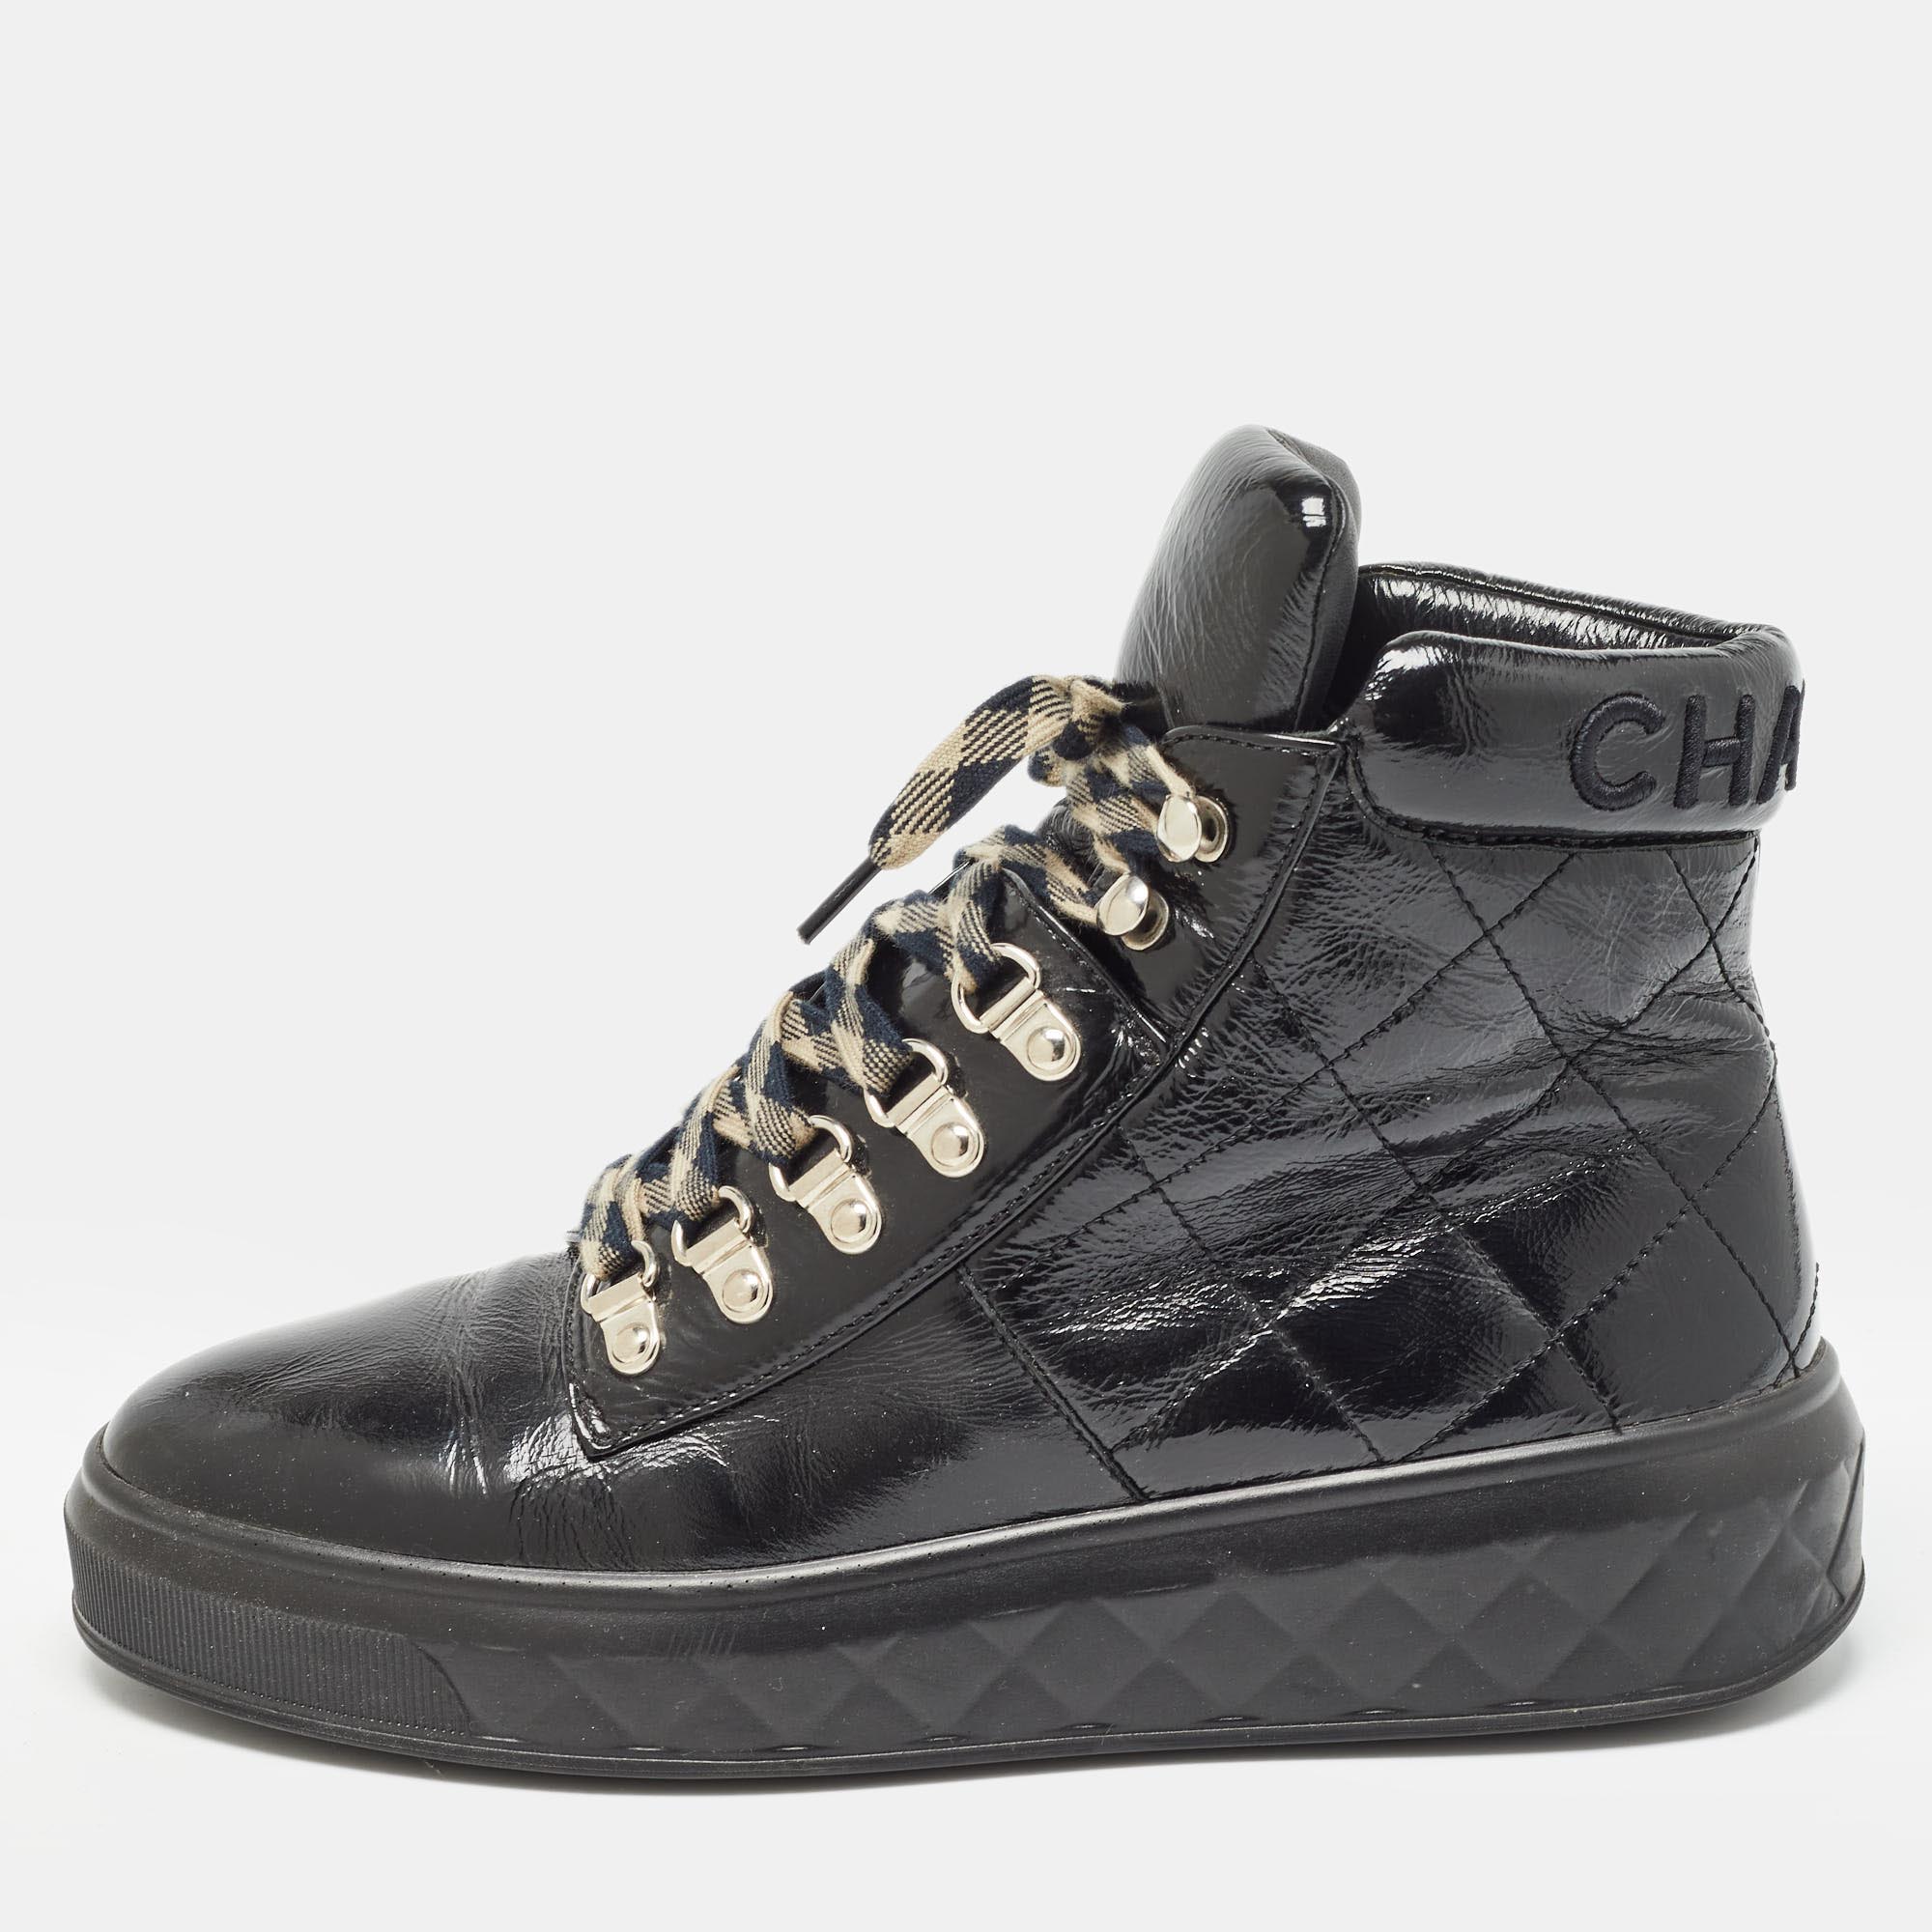 Chanel black quilted patent leather high top sneakers size 38